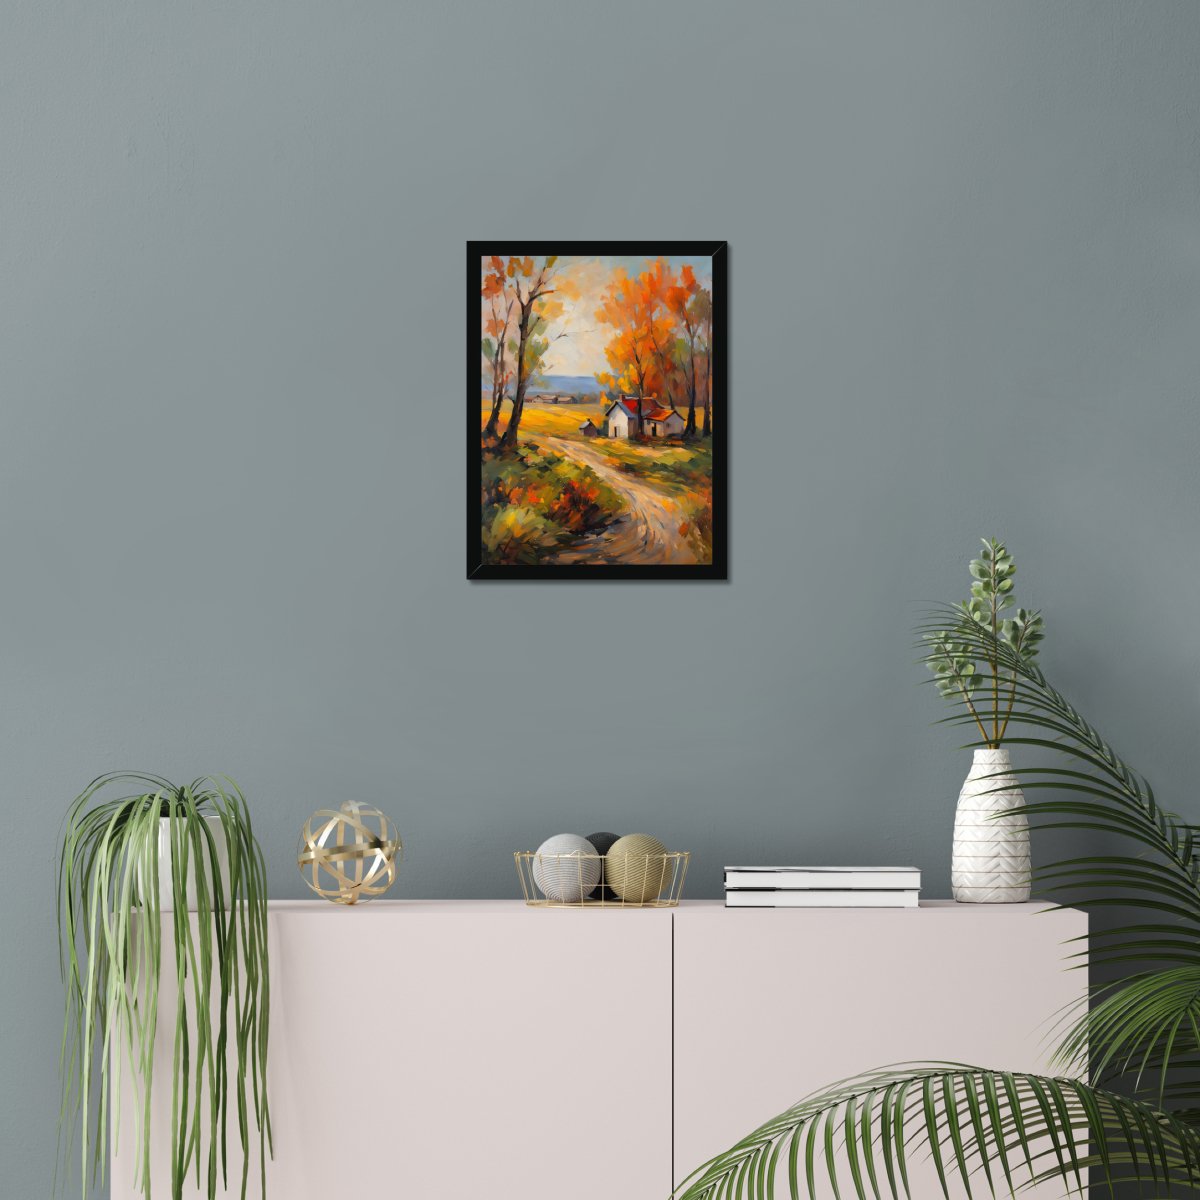 Country road - Art print - Poster - Ever colorful